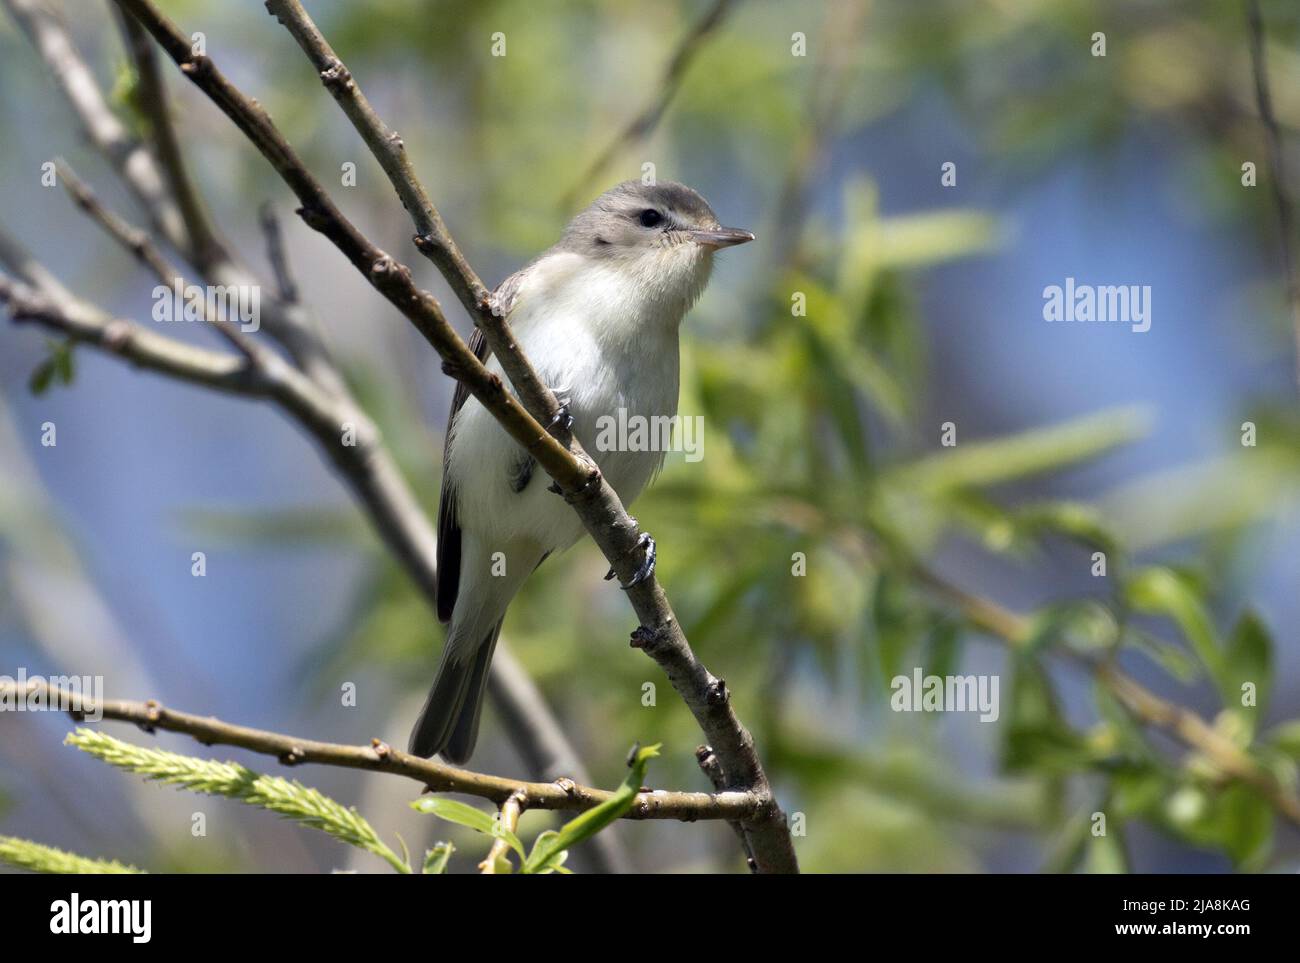 Closeup of Warbling Vireo perching on a leafy branch during spring migration in Ontario,Canada.Scientific name of this bird is Vireo gilvus. Stock Photo